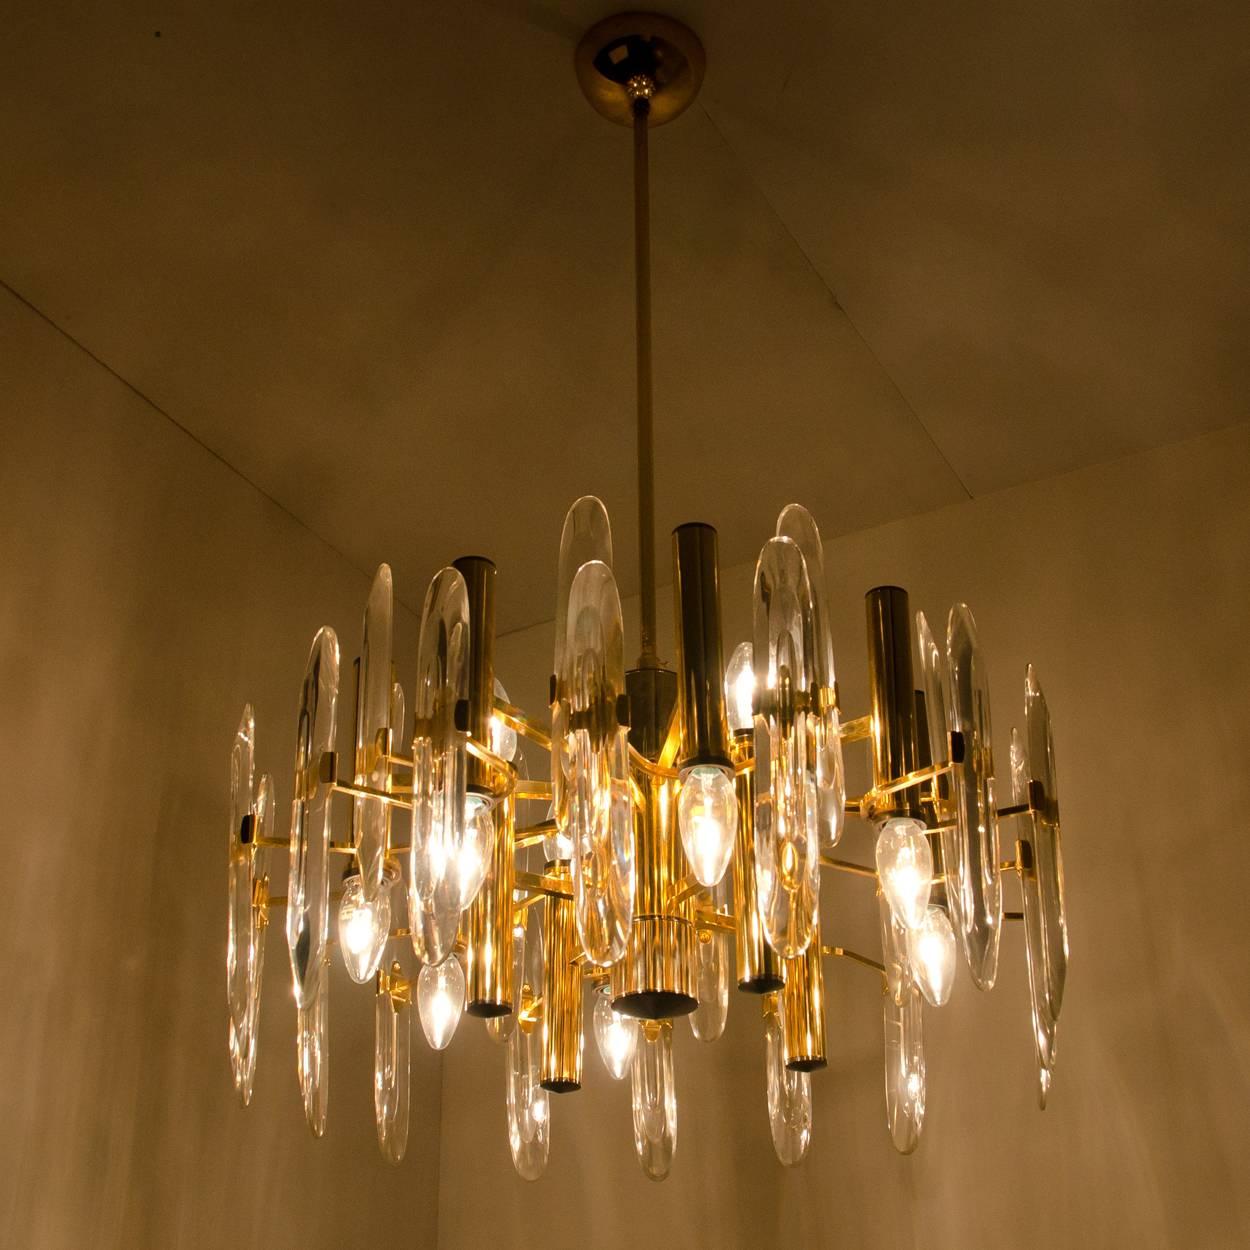 This chandelier was designed by Gaetano Sciolari and was produced in Italy in the 1960s. The two-tiered brass base frame is surrounded by crystal glass vertical shards. The crystals are meticulously cut in such a way that radiate the light of the